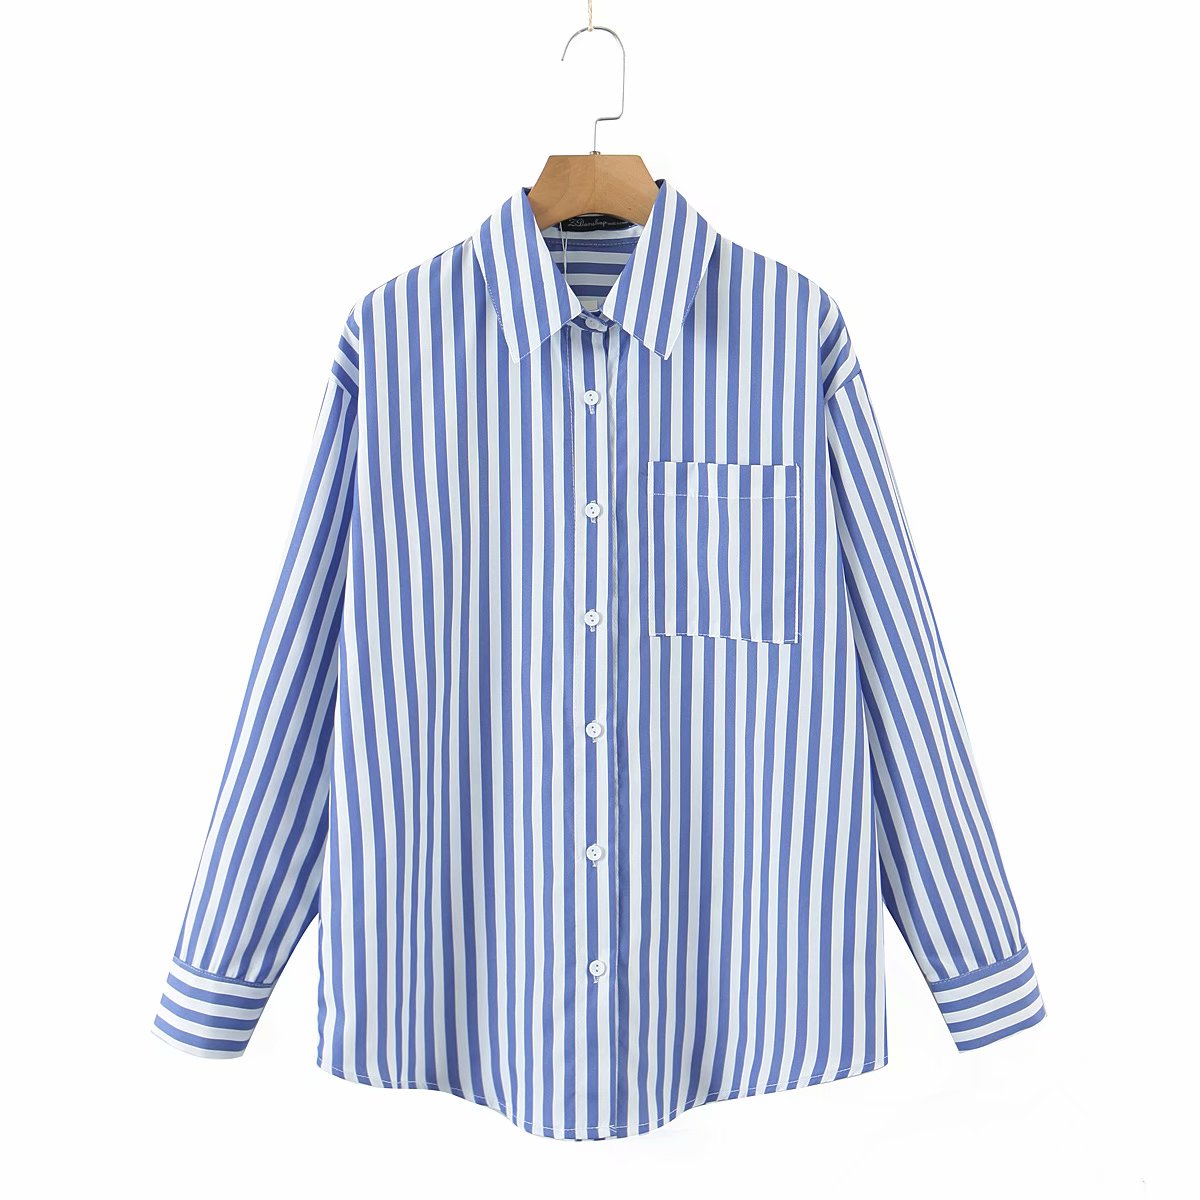 Chicdear Casual Striped Print Buttons Up Blouse Shirts Pocket Oversized Shirt Women Cool Style Holiday Fashion Shirts Female Long Top